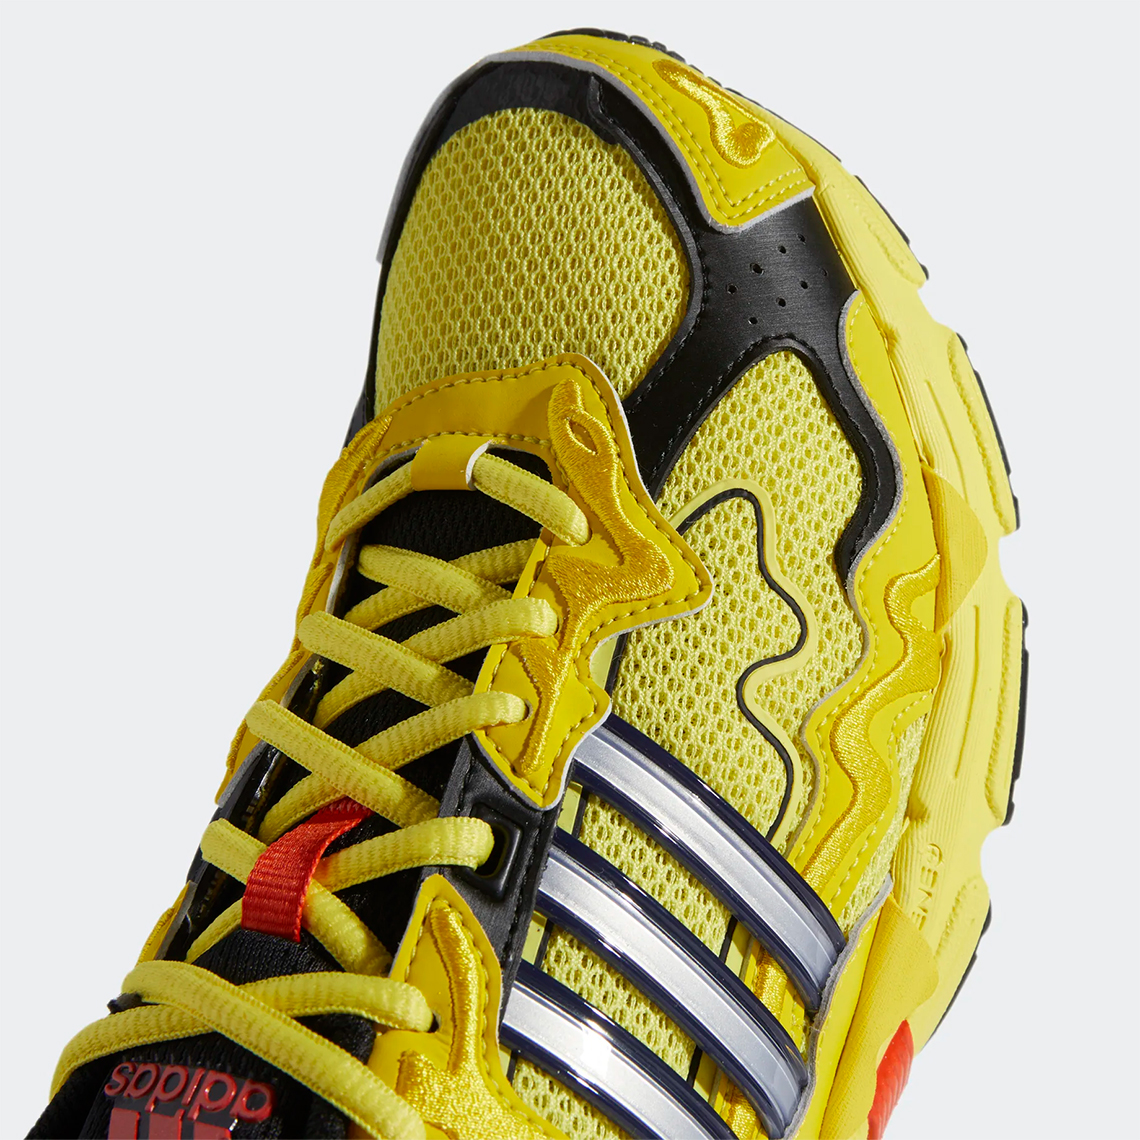 adidas response cl bad bunny yellow gy0101 release date 5